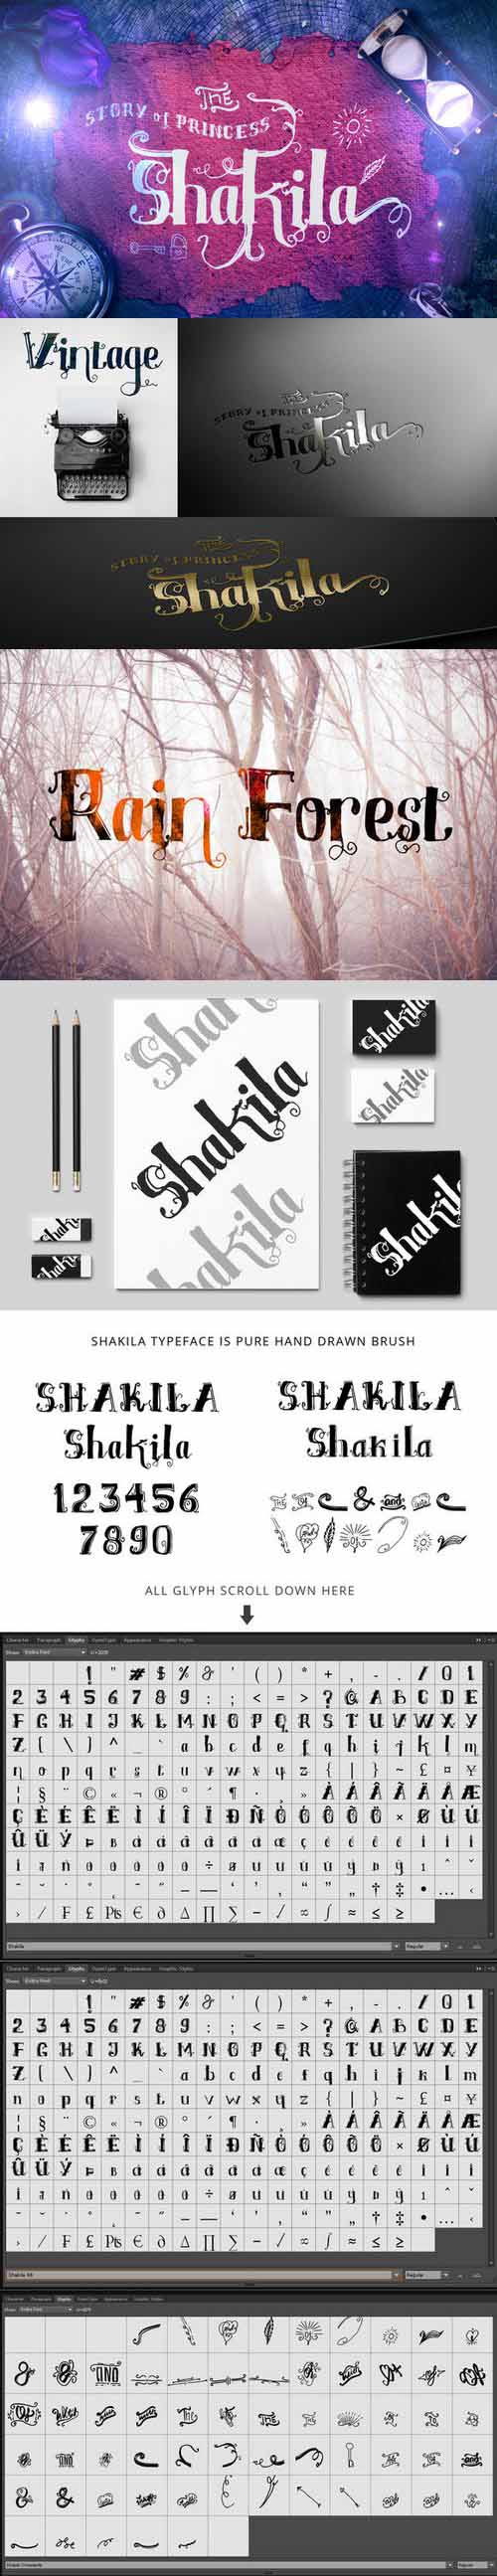 Shakila Typeface Hand Drawn And Ornaments